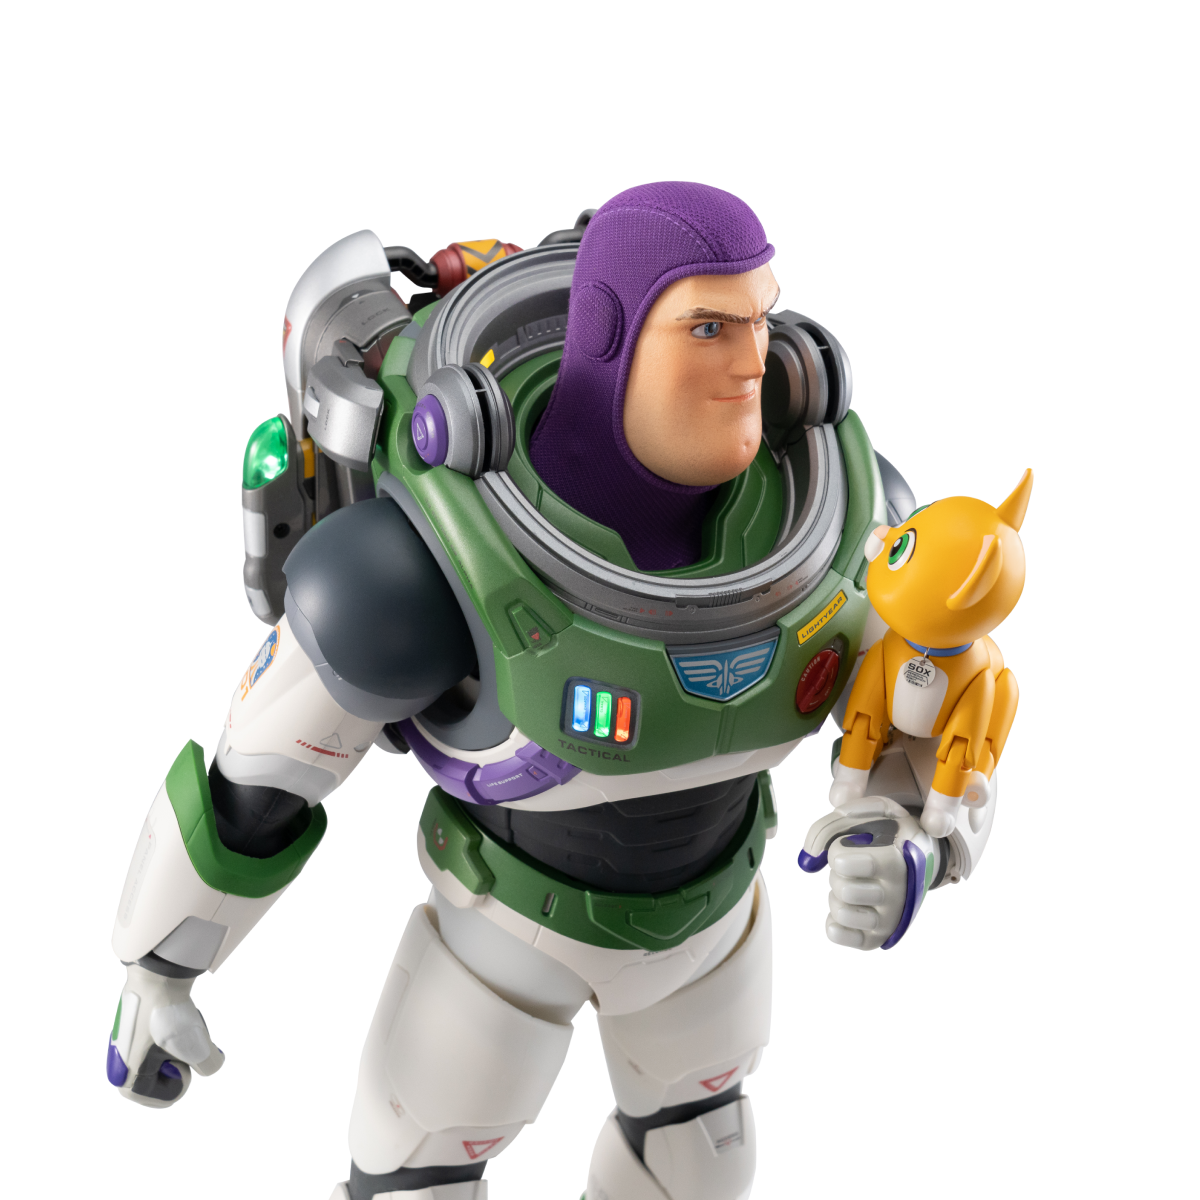 Lightyear Space Ranger Sox Jetpack with Lights Action Figure